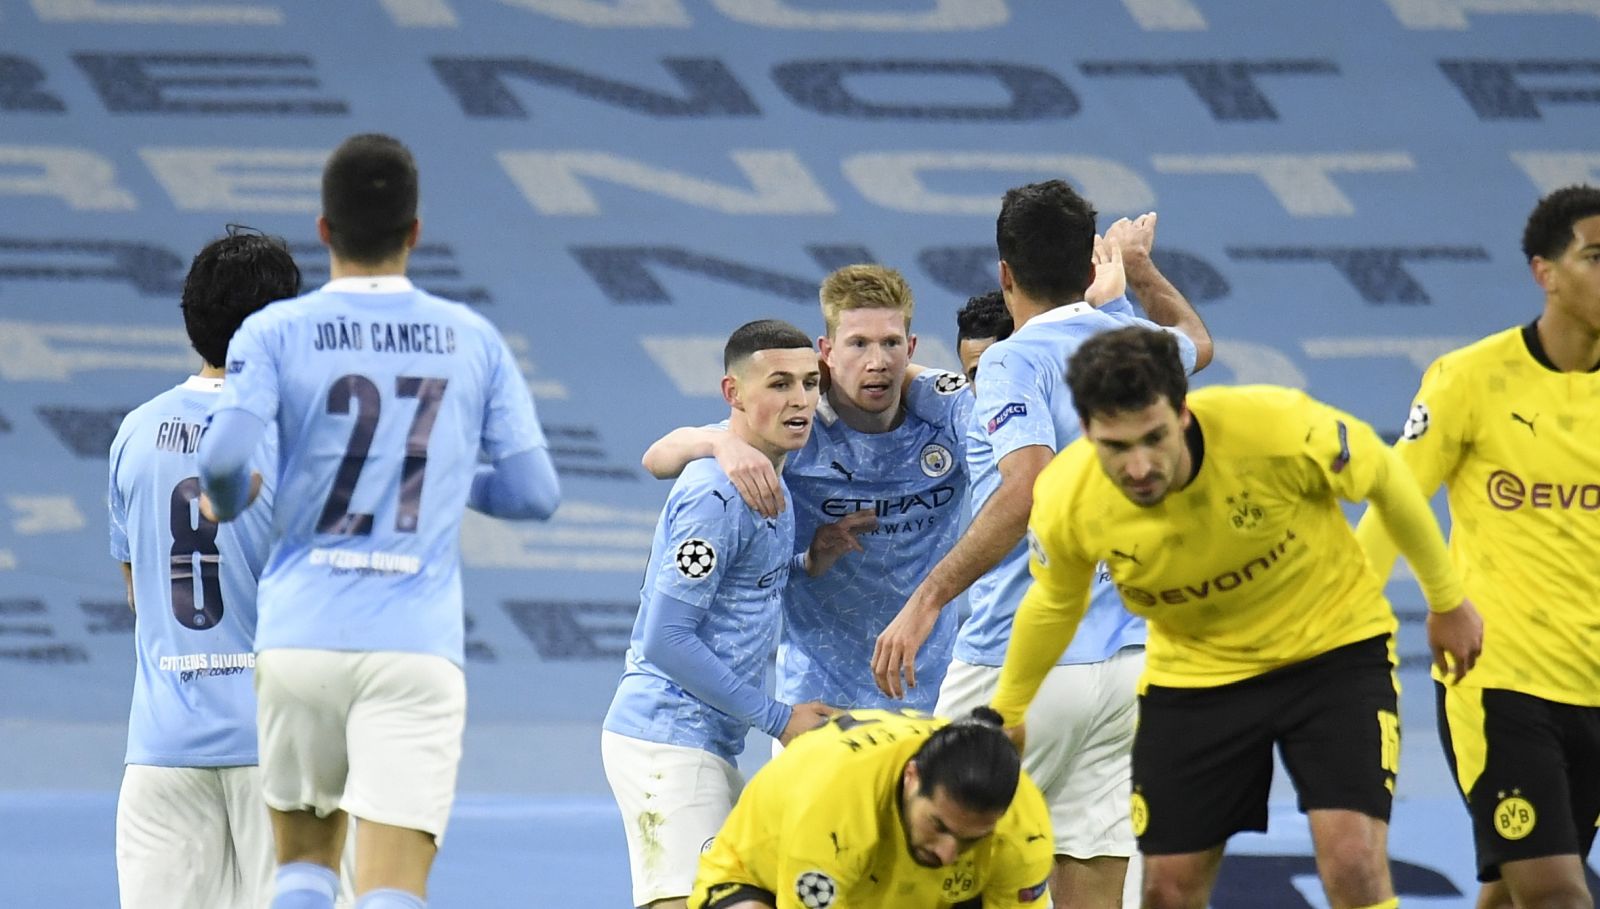 epa09119259 Kevin De Bruyne (back-C) of Manchester City celebrates with teammates after scoring the 1-0 lead as Emre Can (front, bottom) of Dortmund reacts during the UEFA Champions League quarterfinal, 1st leg soccer match between Manchester City and Borussia Dortmund in Manchester, Britain, 06 April 2021.  EPA/PETER POWELL